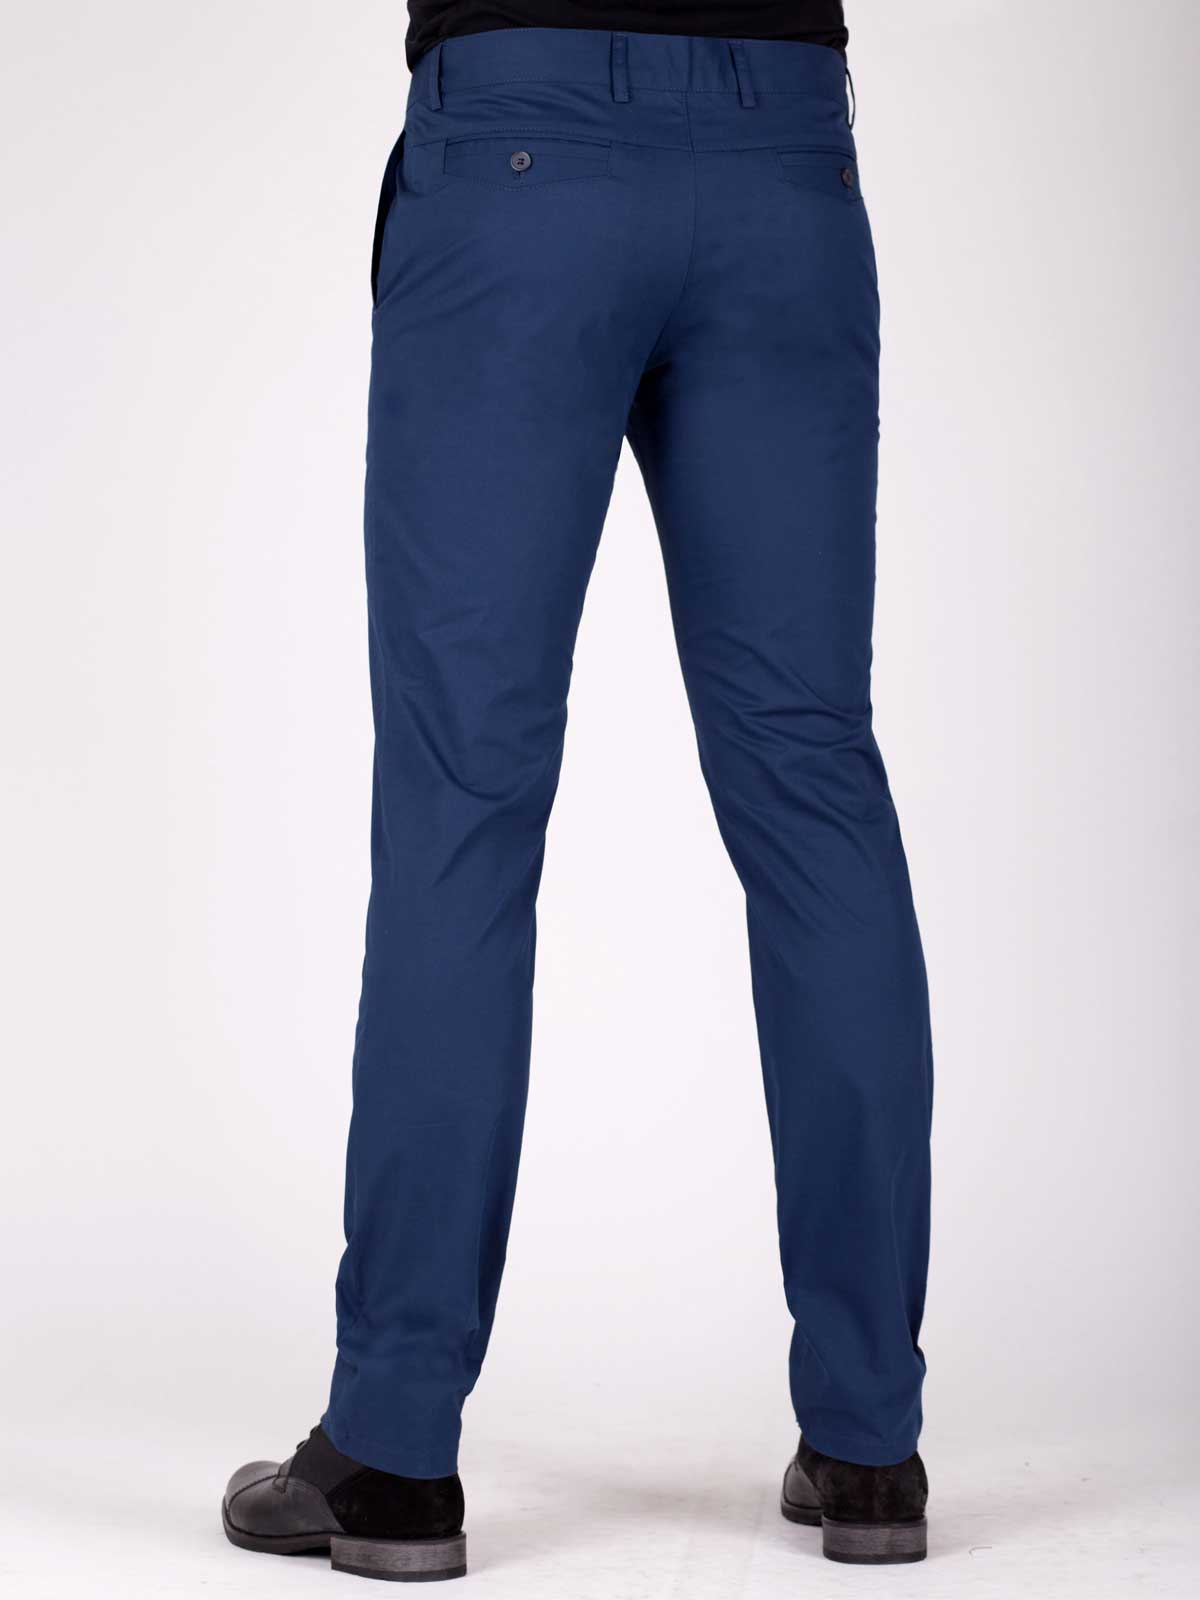 Fitted trousers in blue - 63188 € 16.31 img2